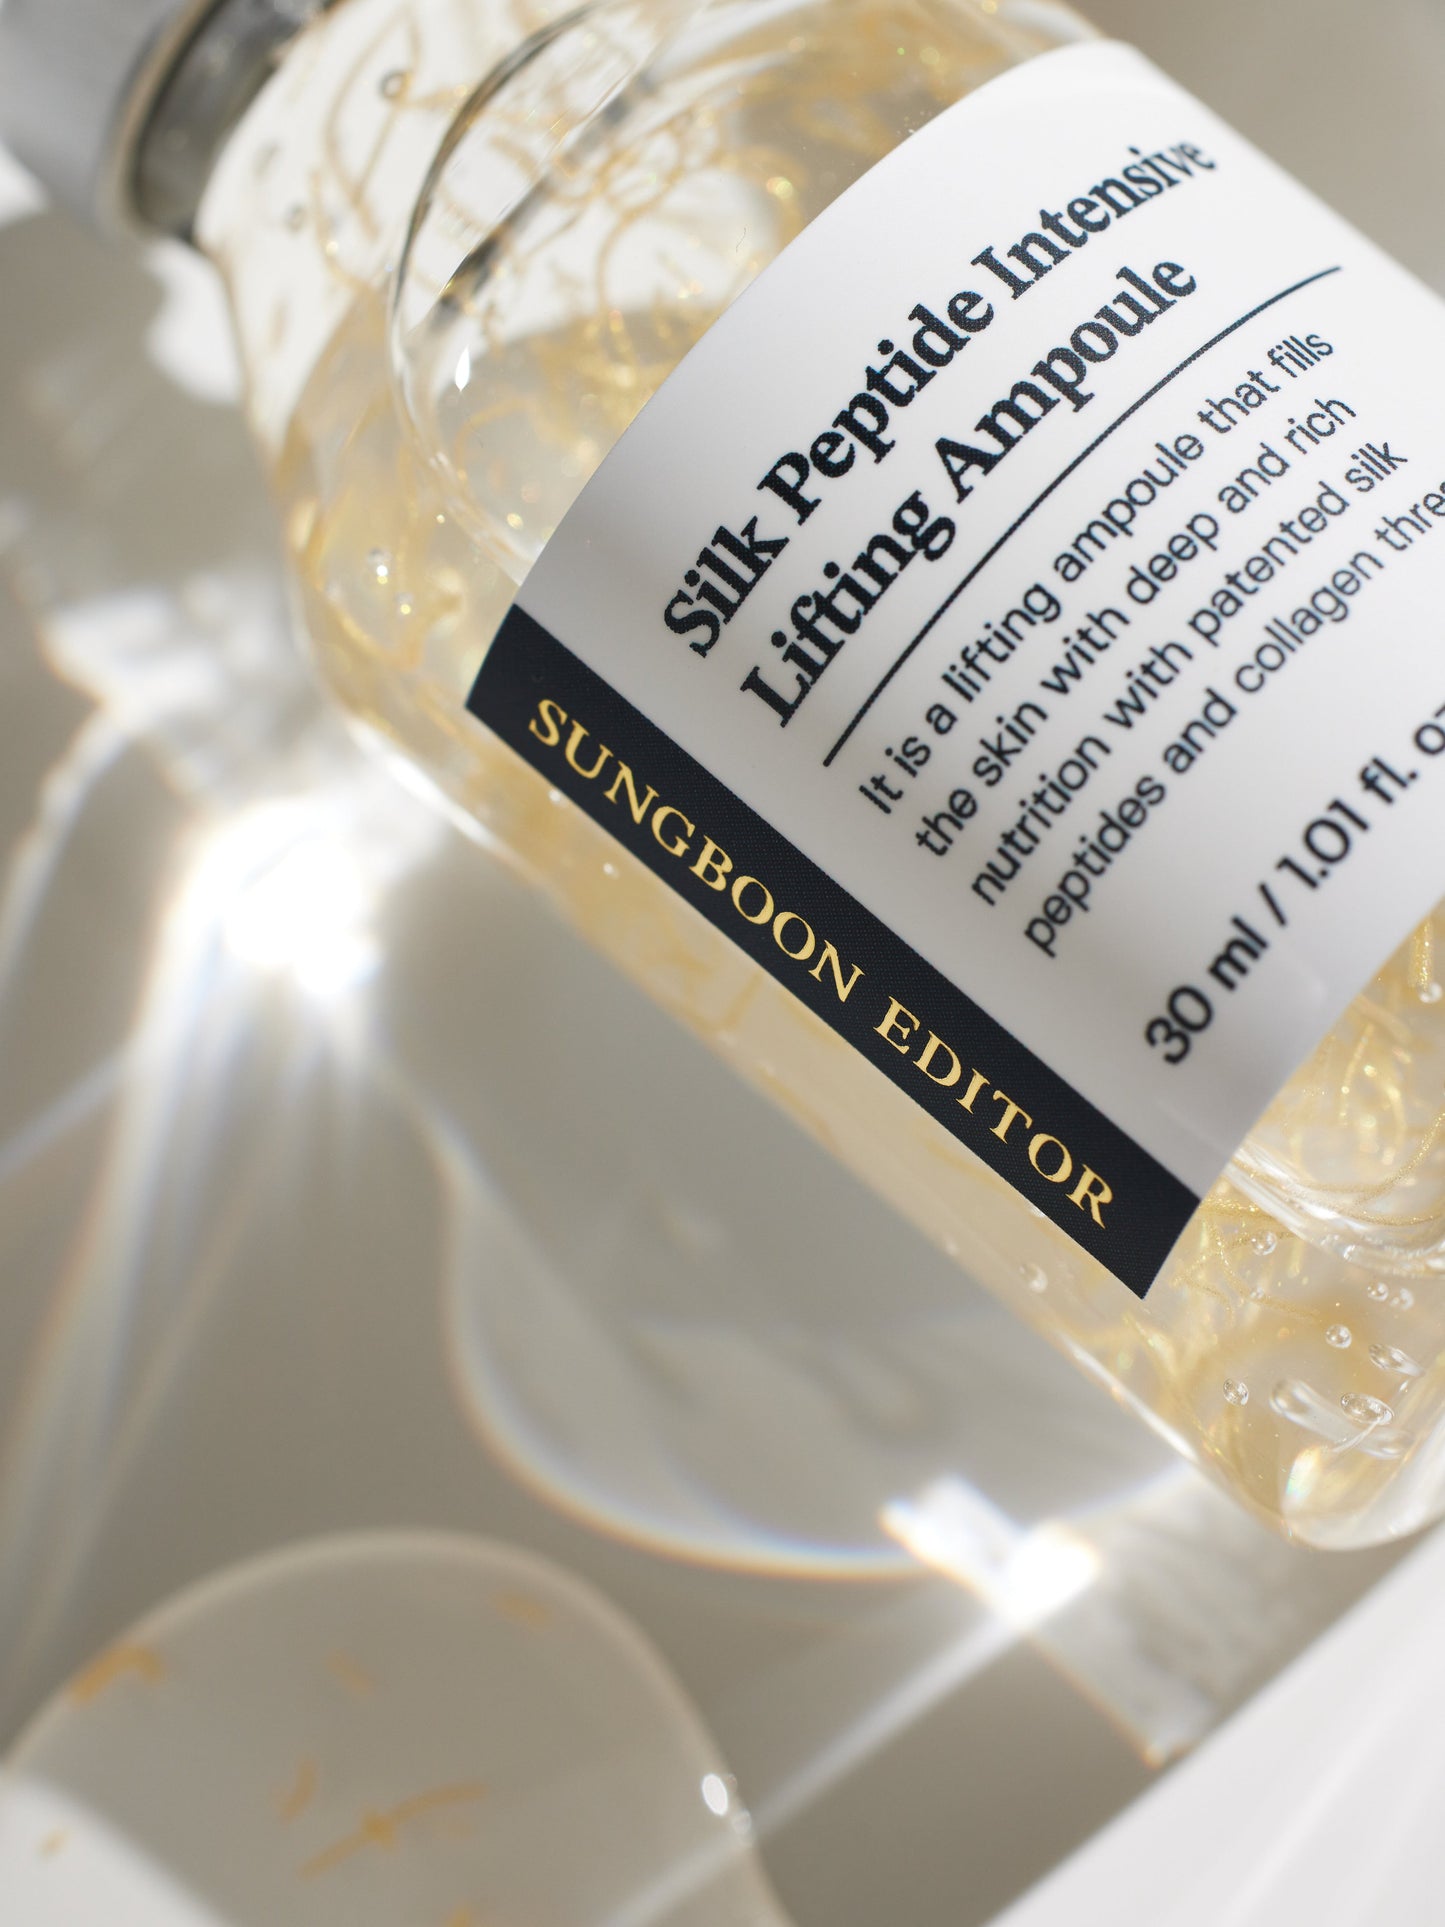 Sungboon Editor Silk Peptide Intensive Lifting Ampoule